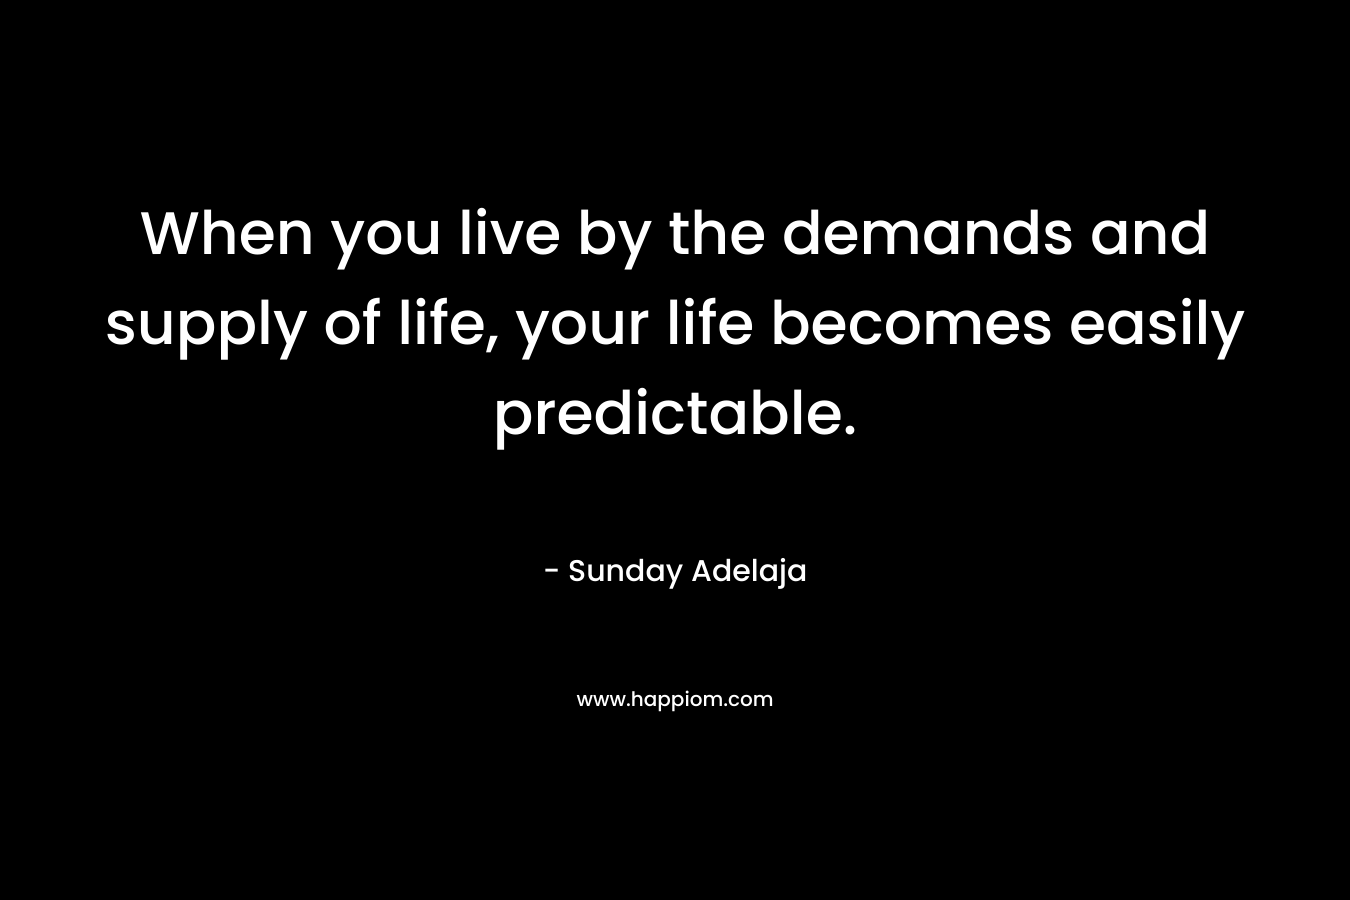 When you live by the demands and supply of life, your life becomes easily predictable.